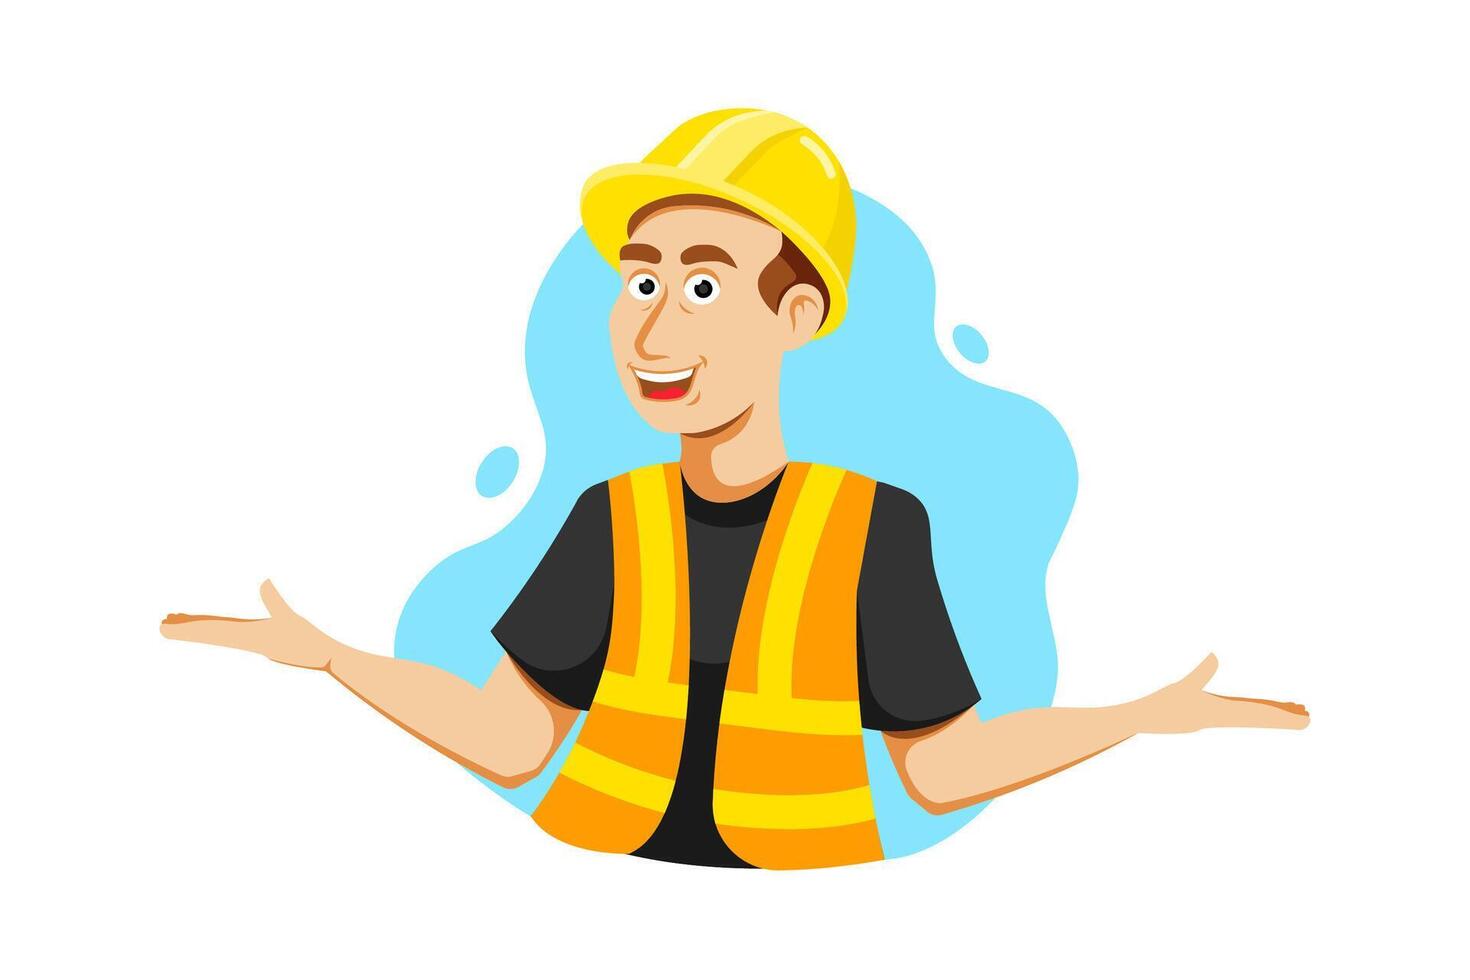 No problem hand sign, Happy technician man cartoon on isolated background, Vector illustration.